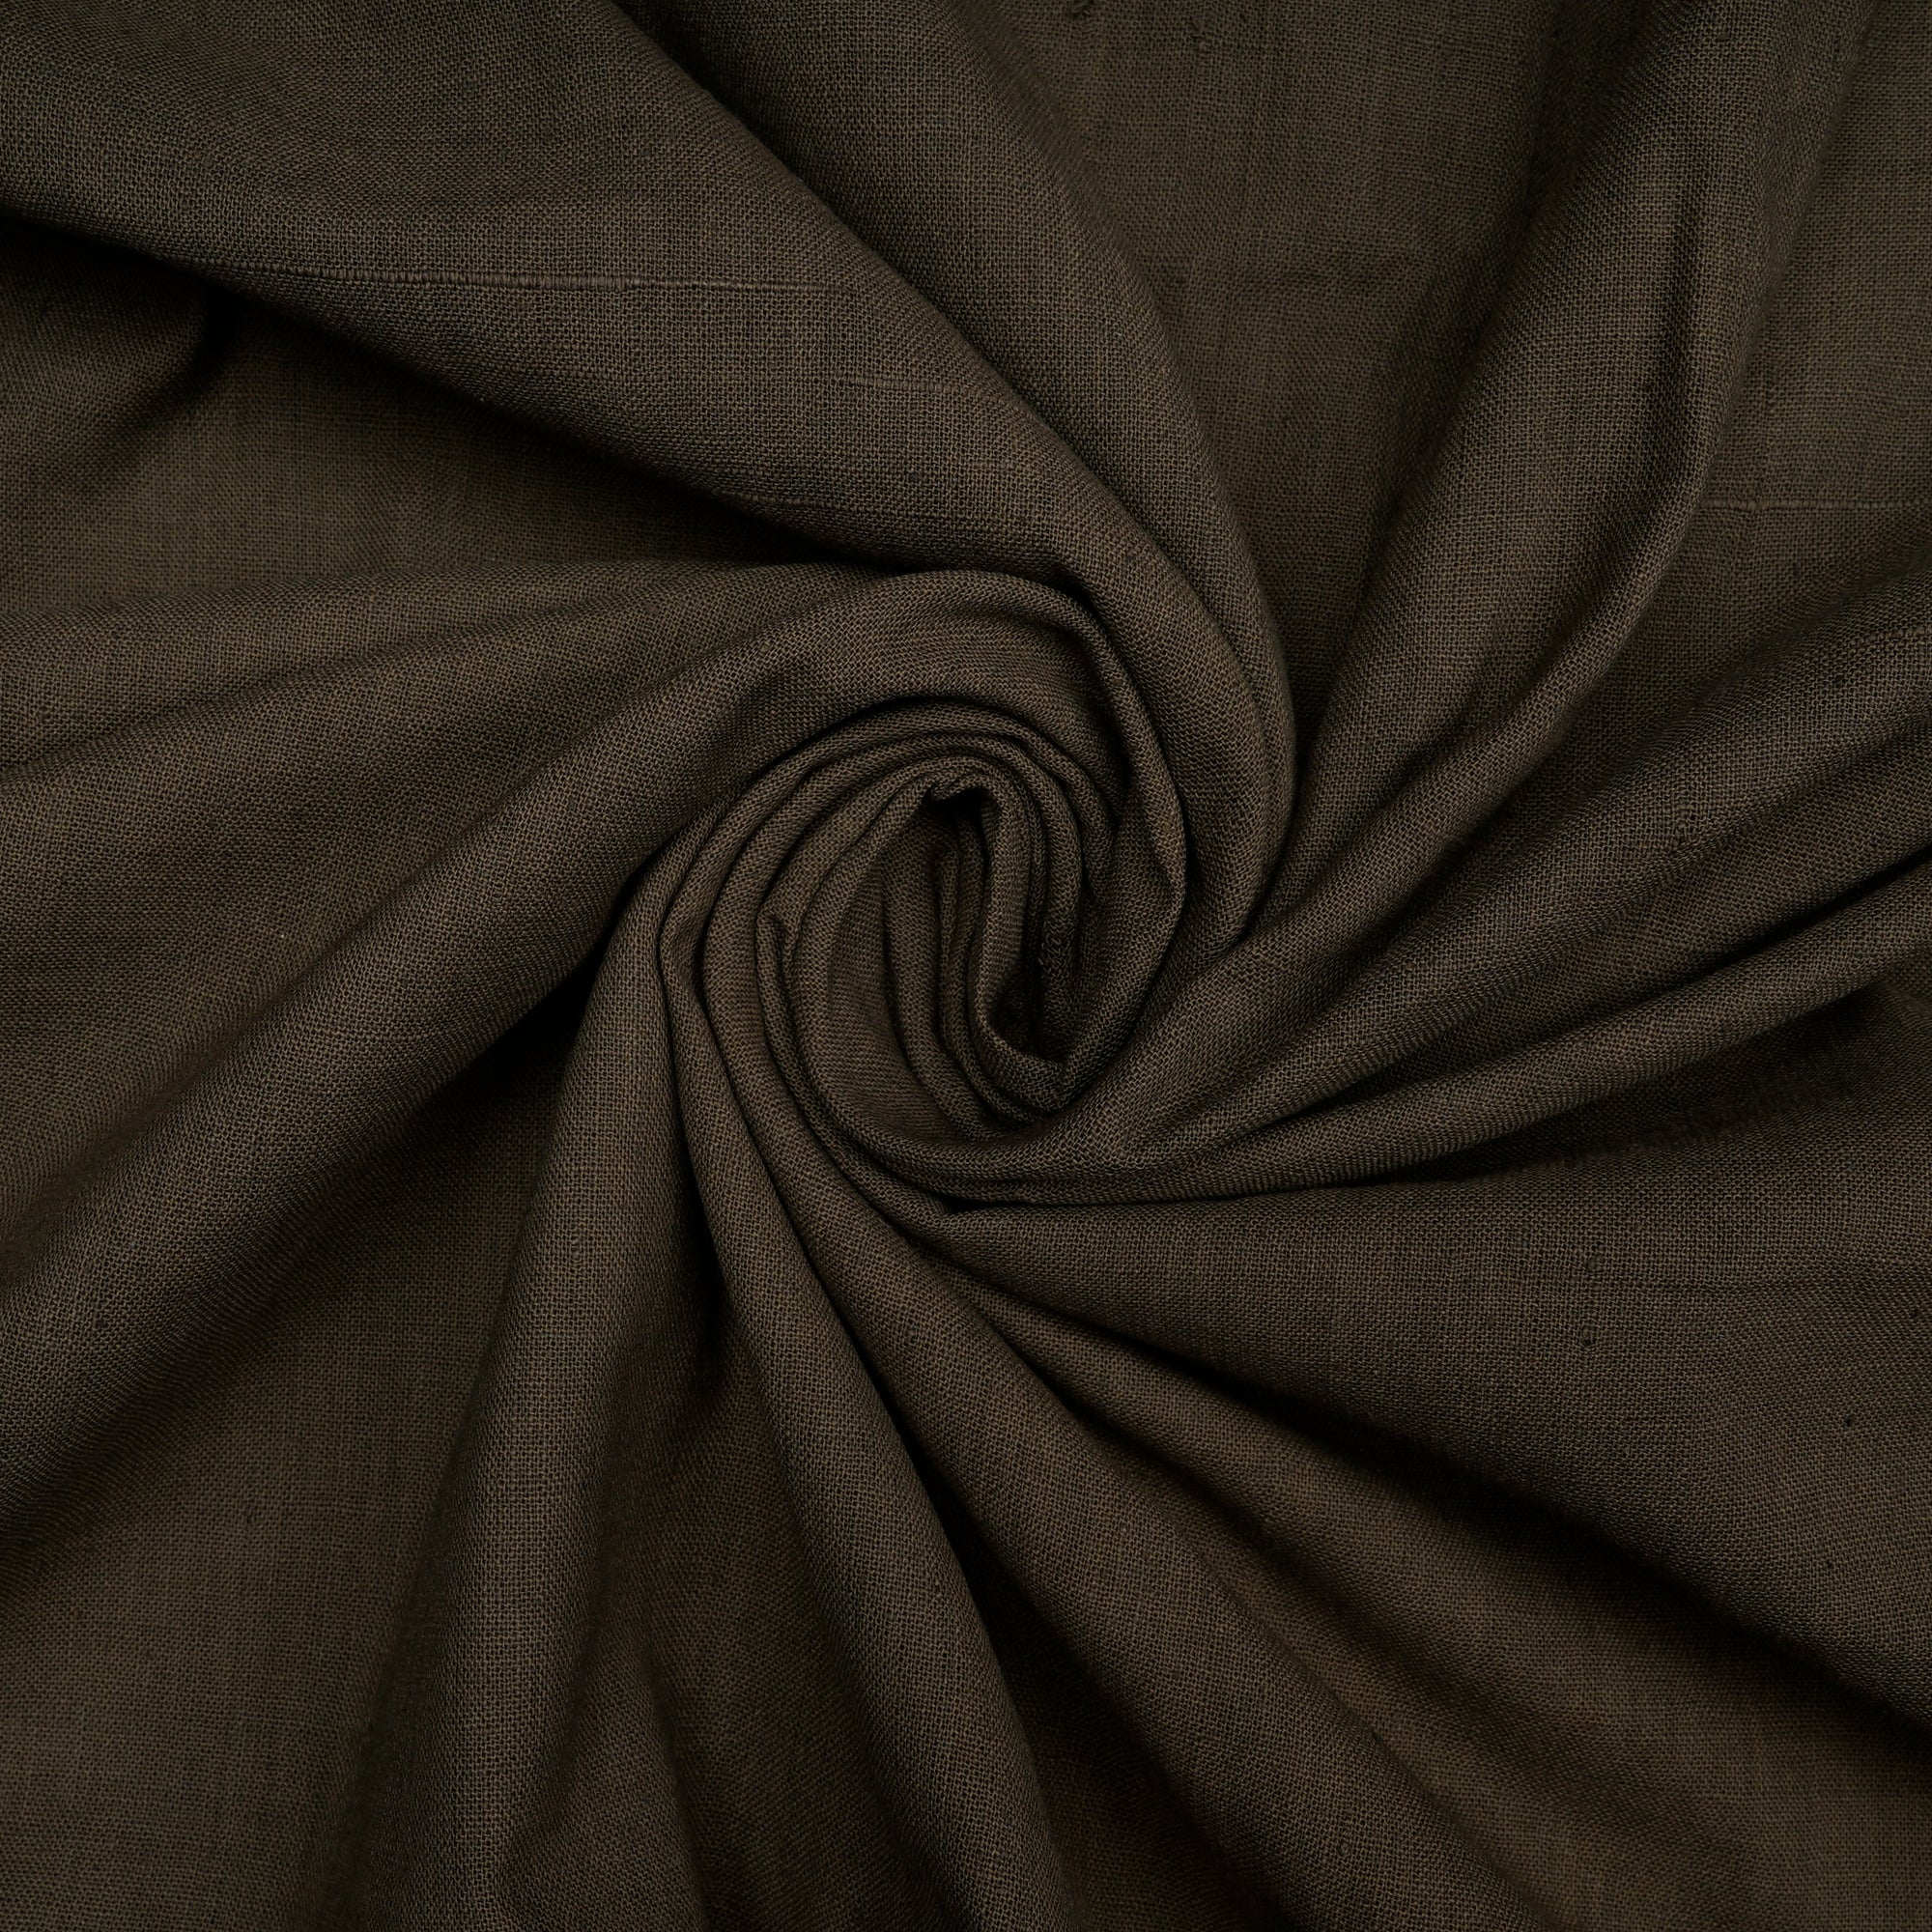 Dark Olive 40's Count Piece Dyed Handspun Handwoven Cotton Fabric